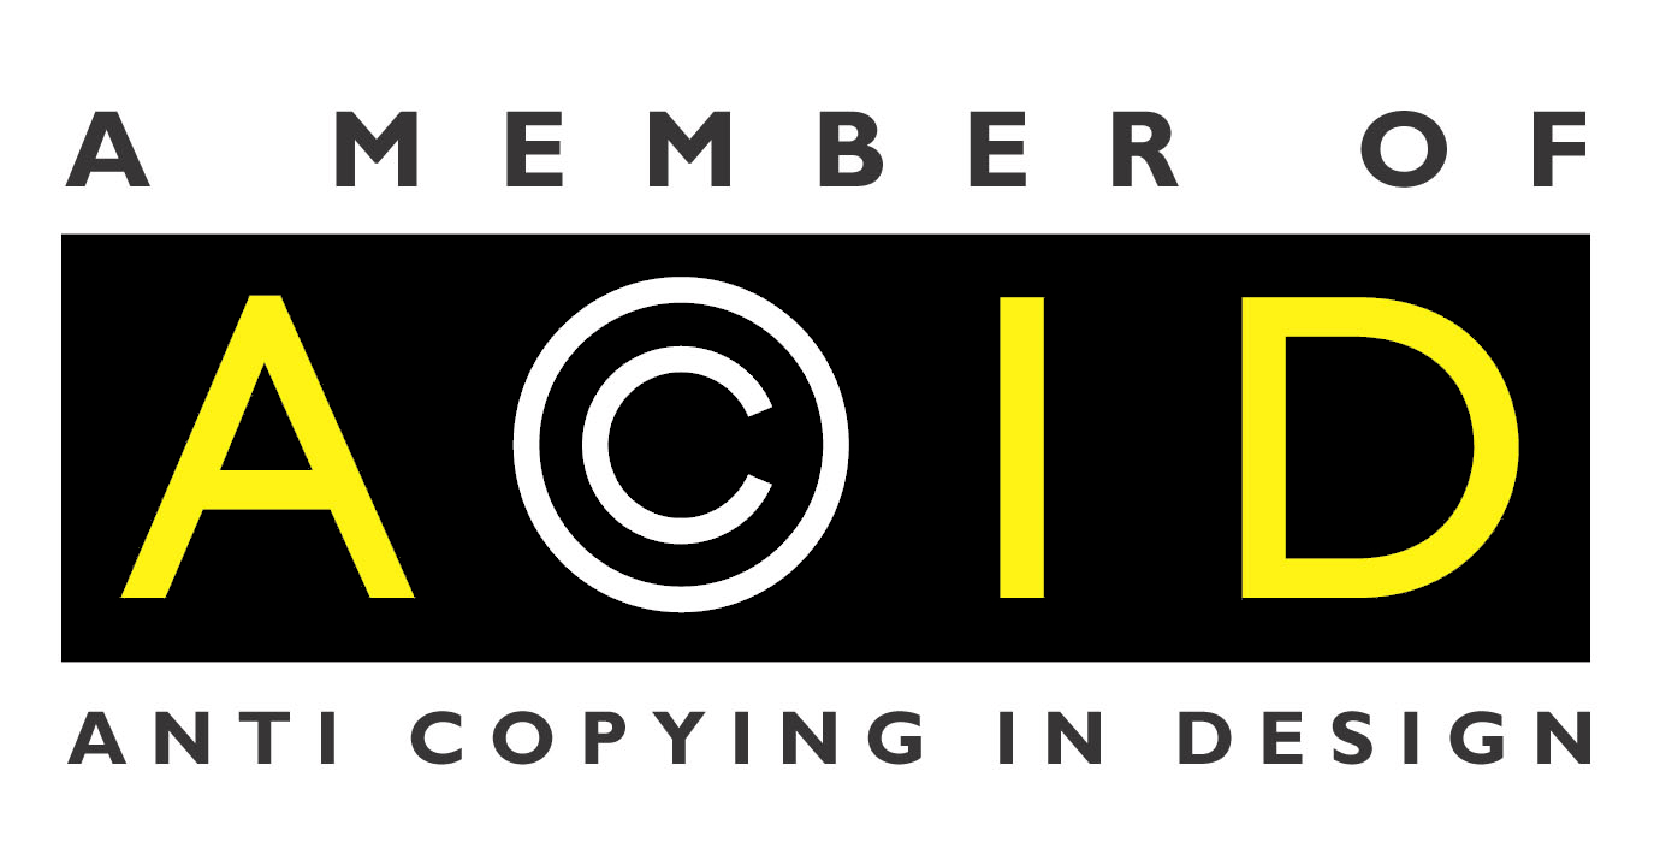 Additional Copyright protection provided by Anti Copying In Design